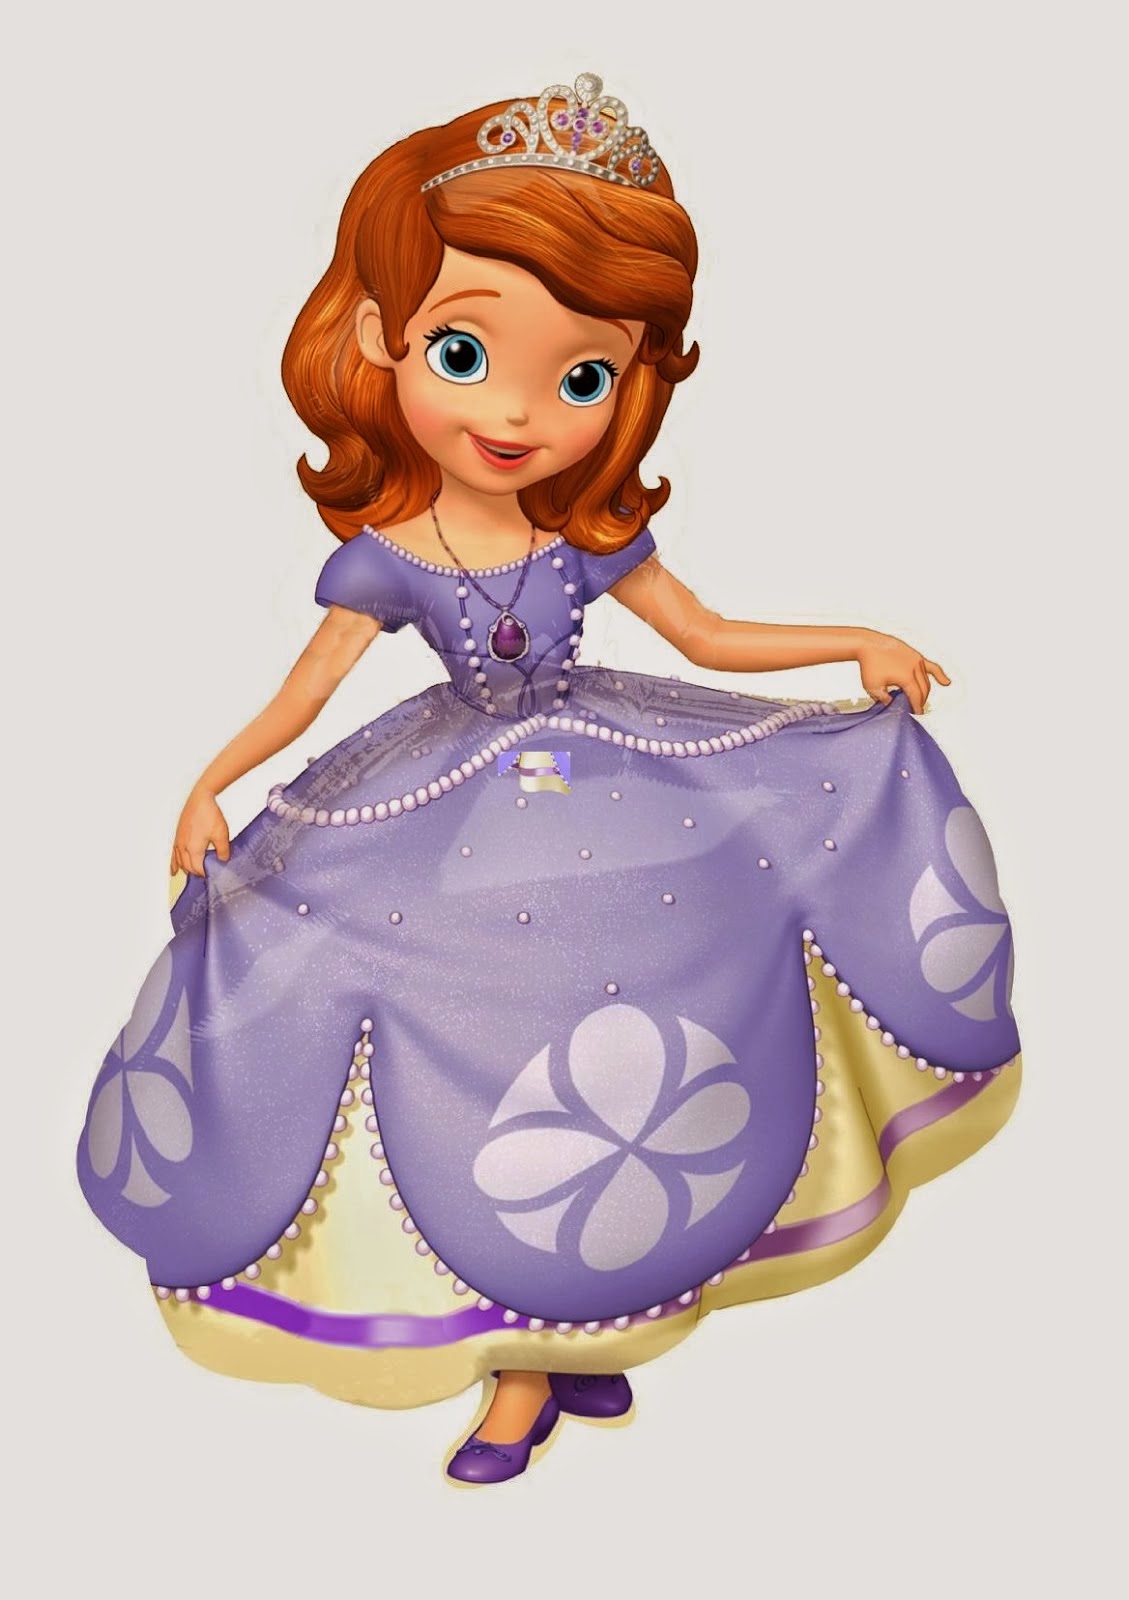 princess-sofia-the-first-free-printable-kit-oh-my-fiesta-in-english